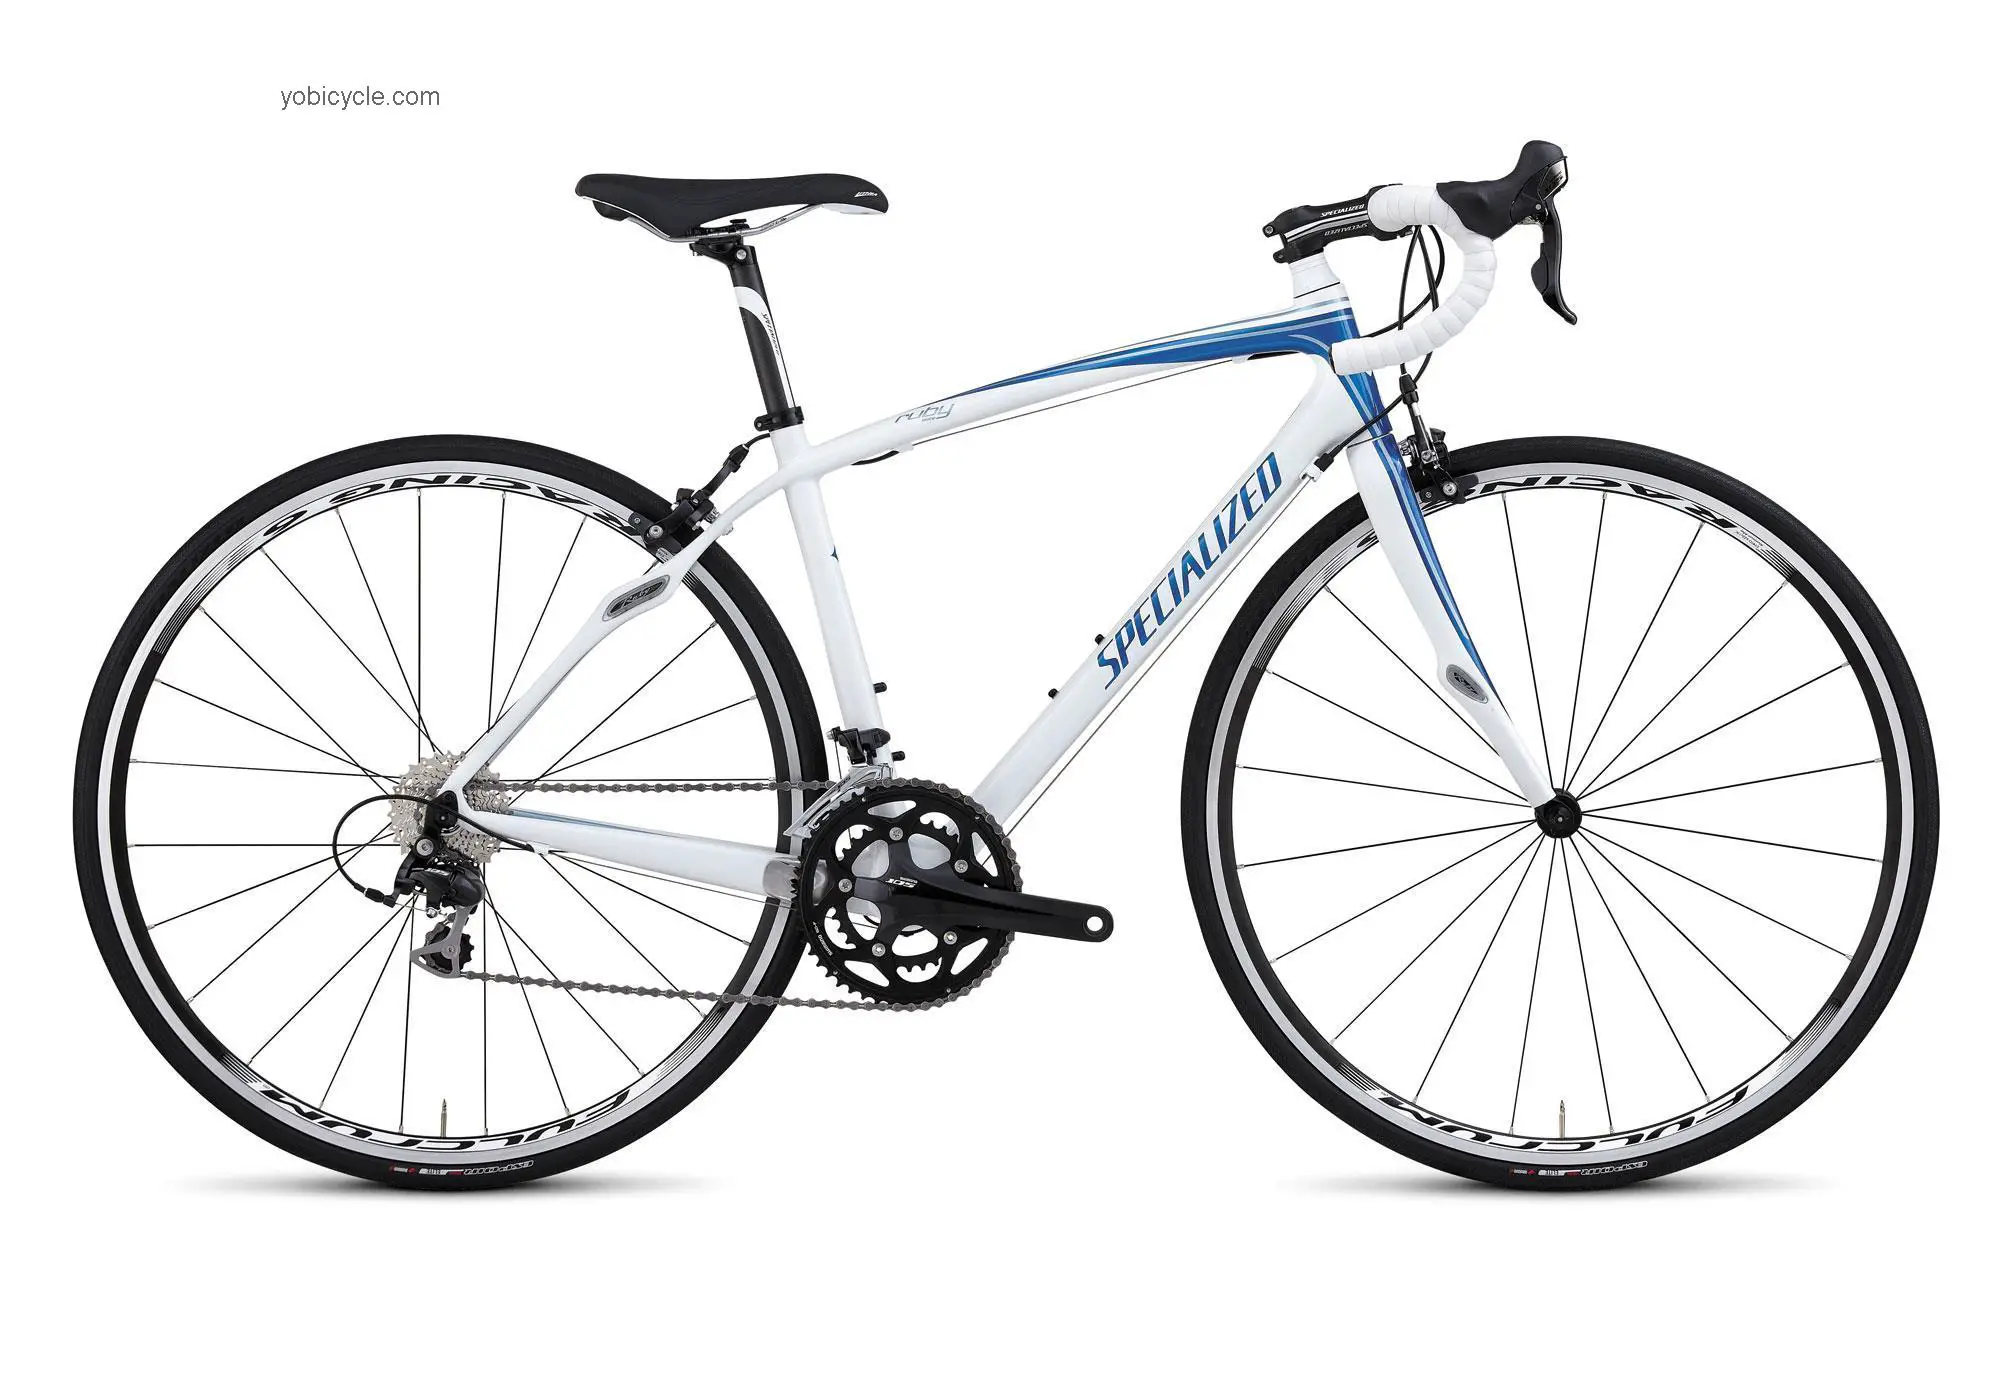 Specialized Ruby Elite Compact 2012 comparison online with competitors